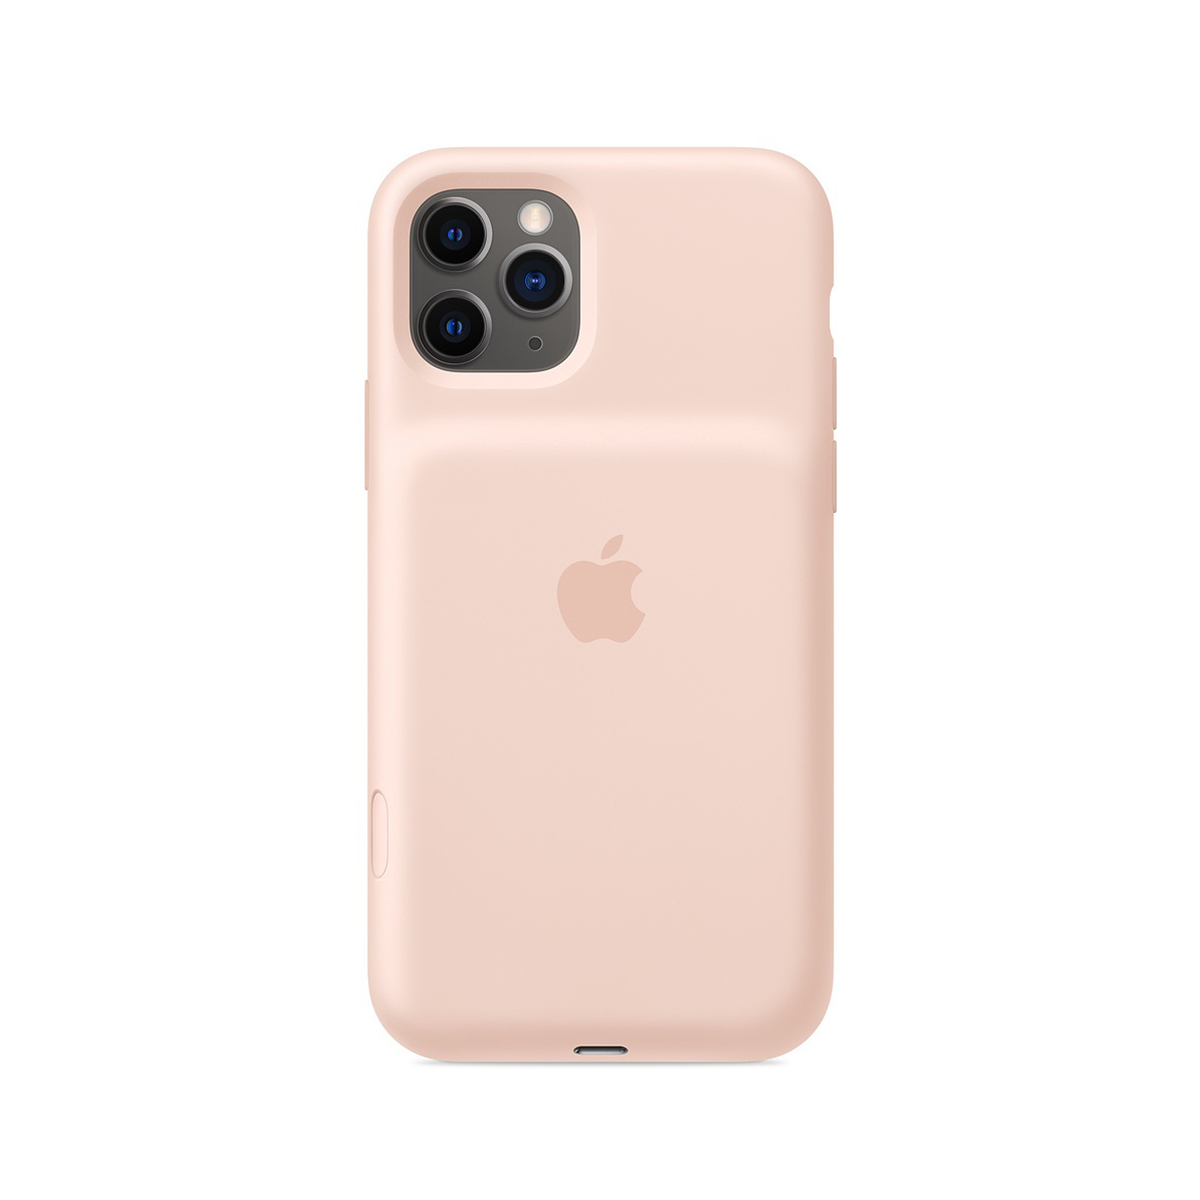 iPhone 11 Pro Smart Battery Case - Pink Sand